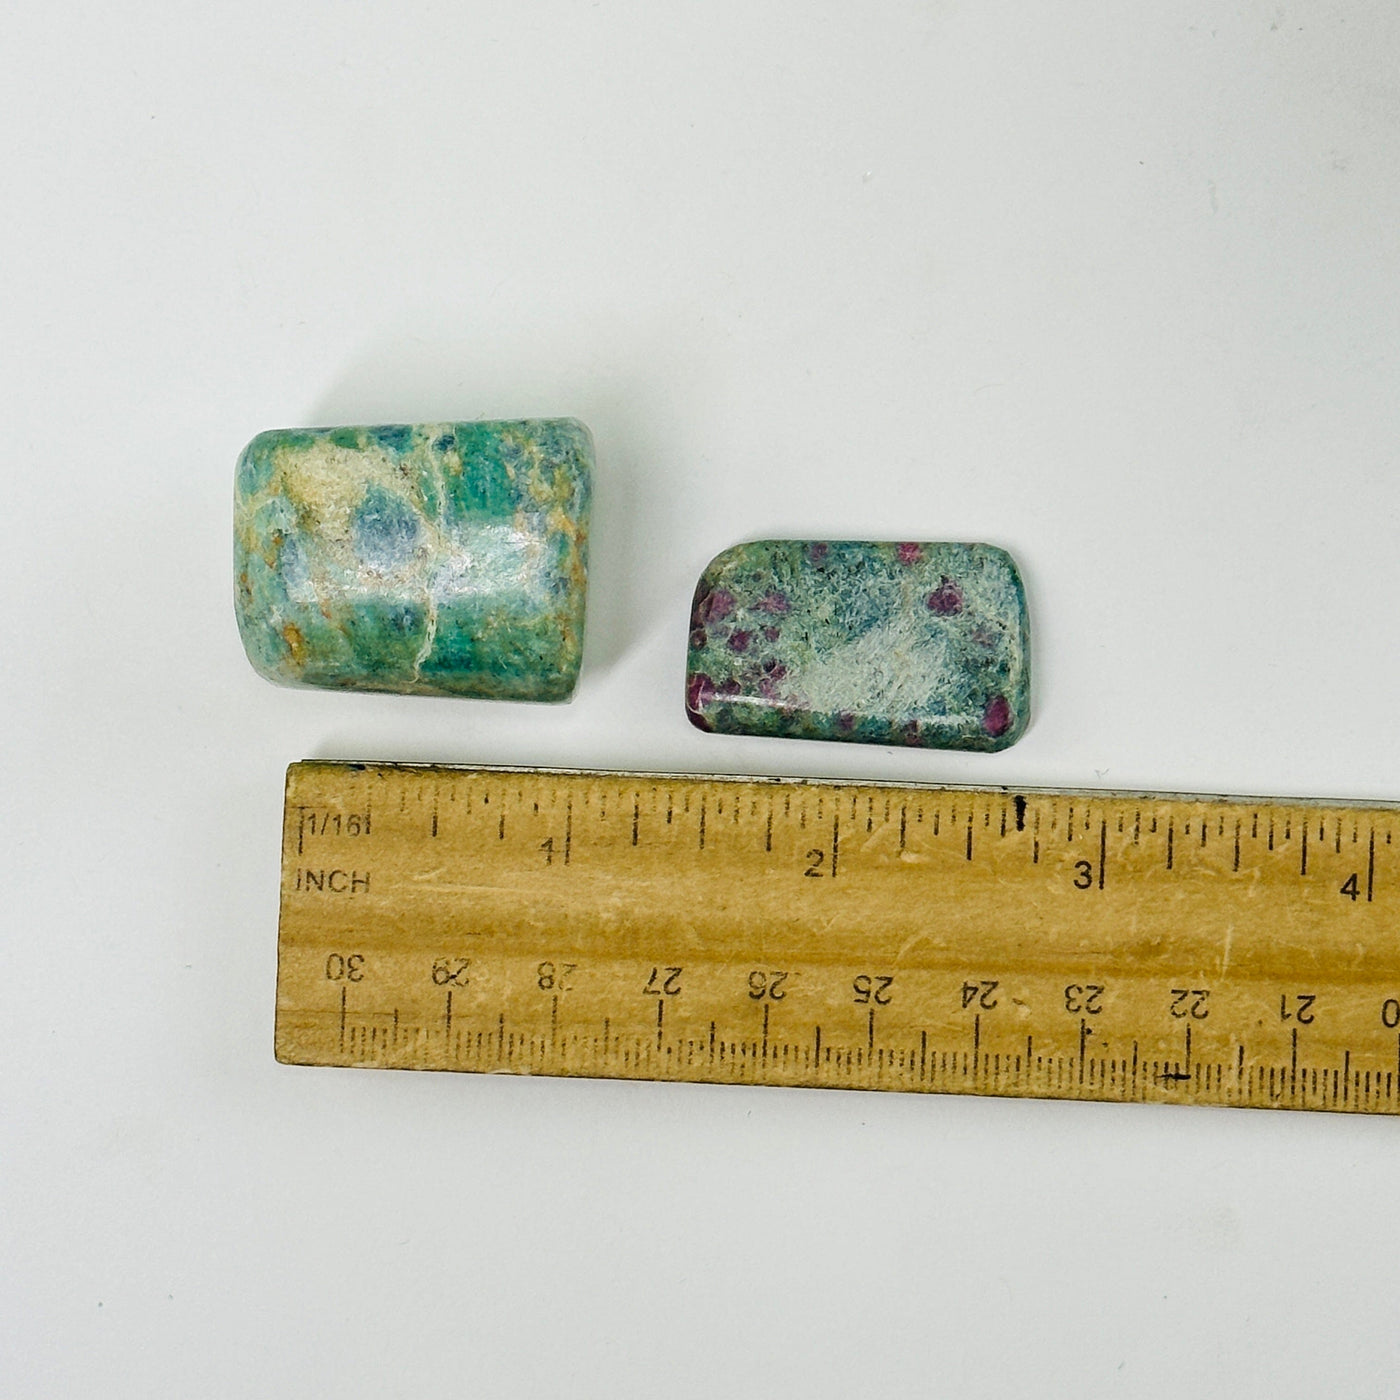 ruby fuchsite tumbled stones next to a ruler for size reference